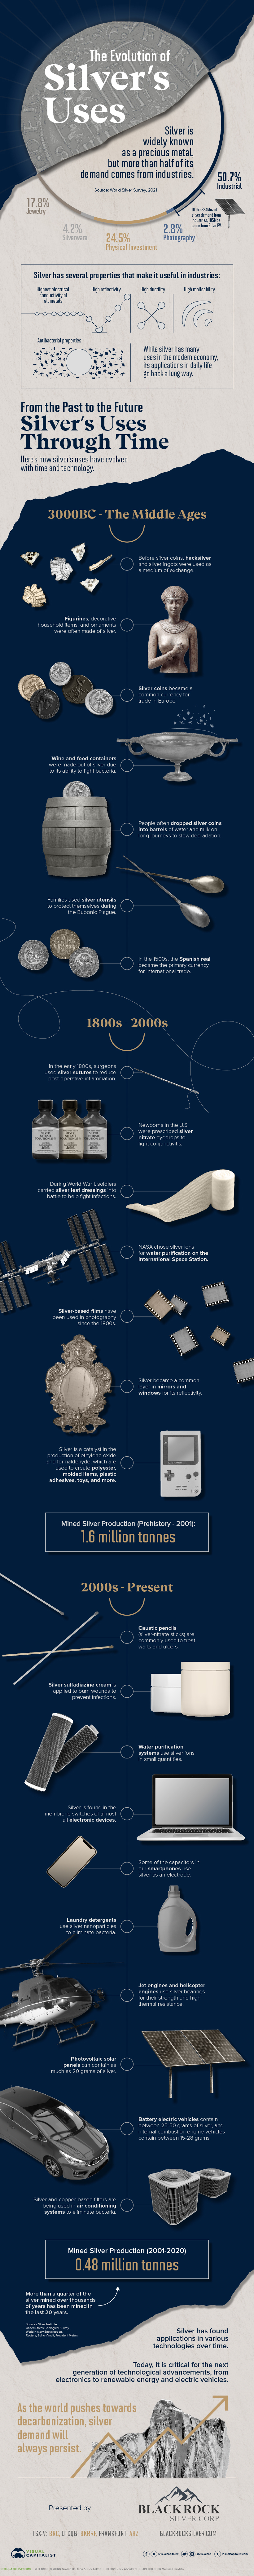 uses-of-silver-infographic.jpg